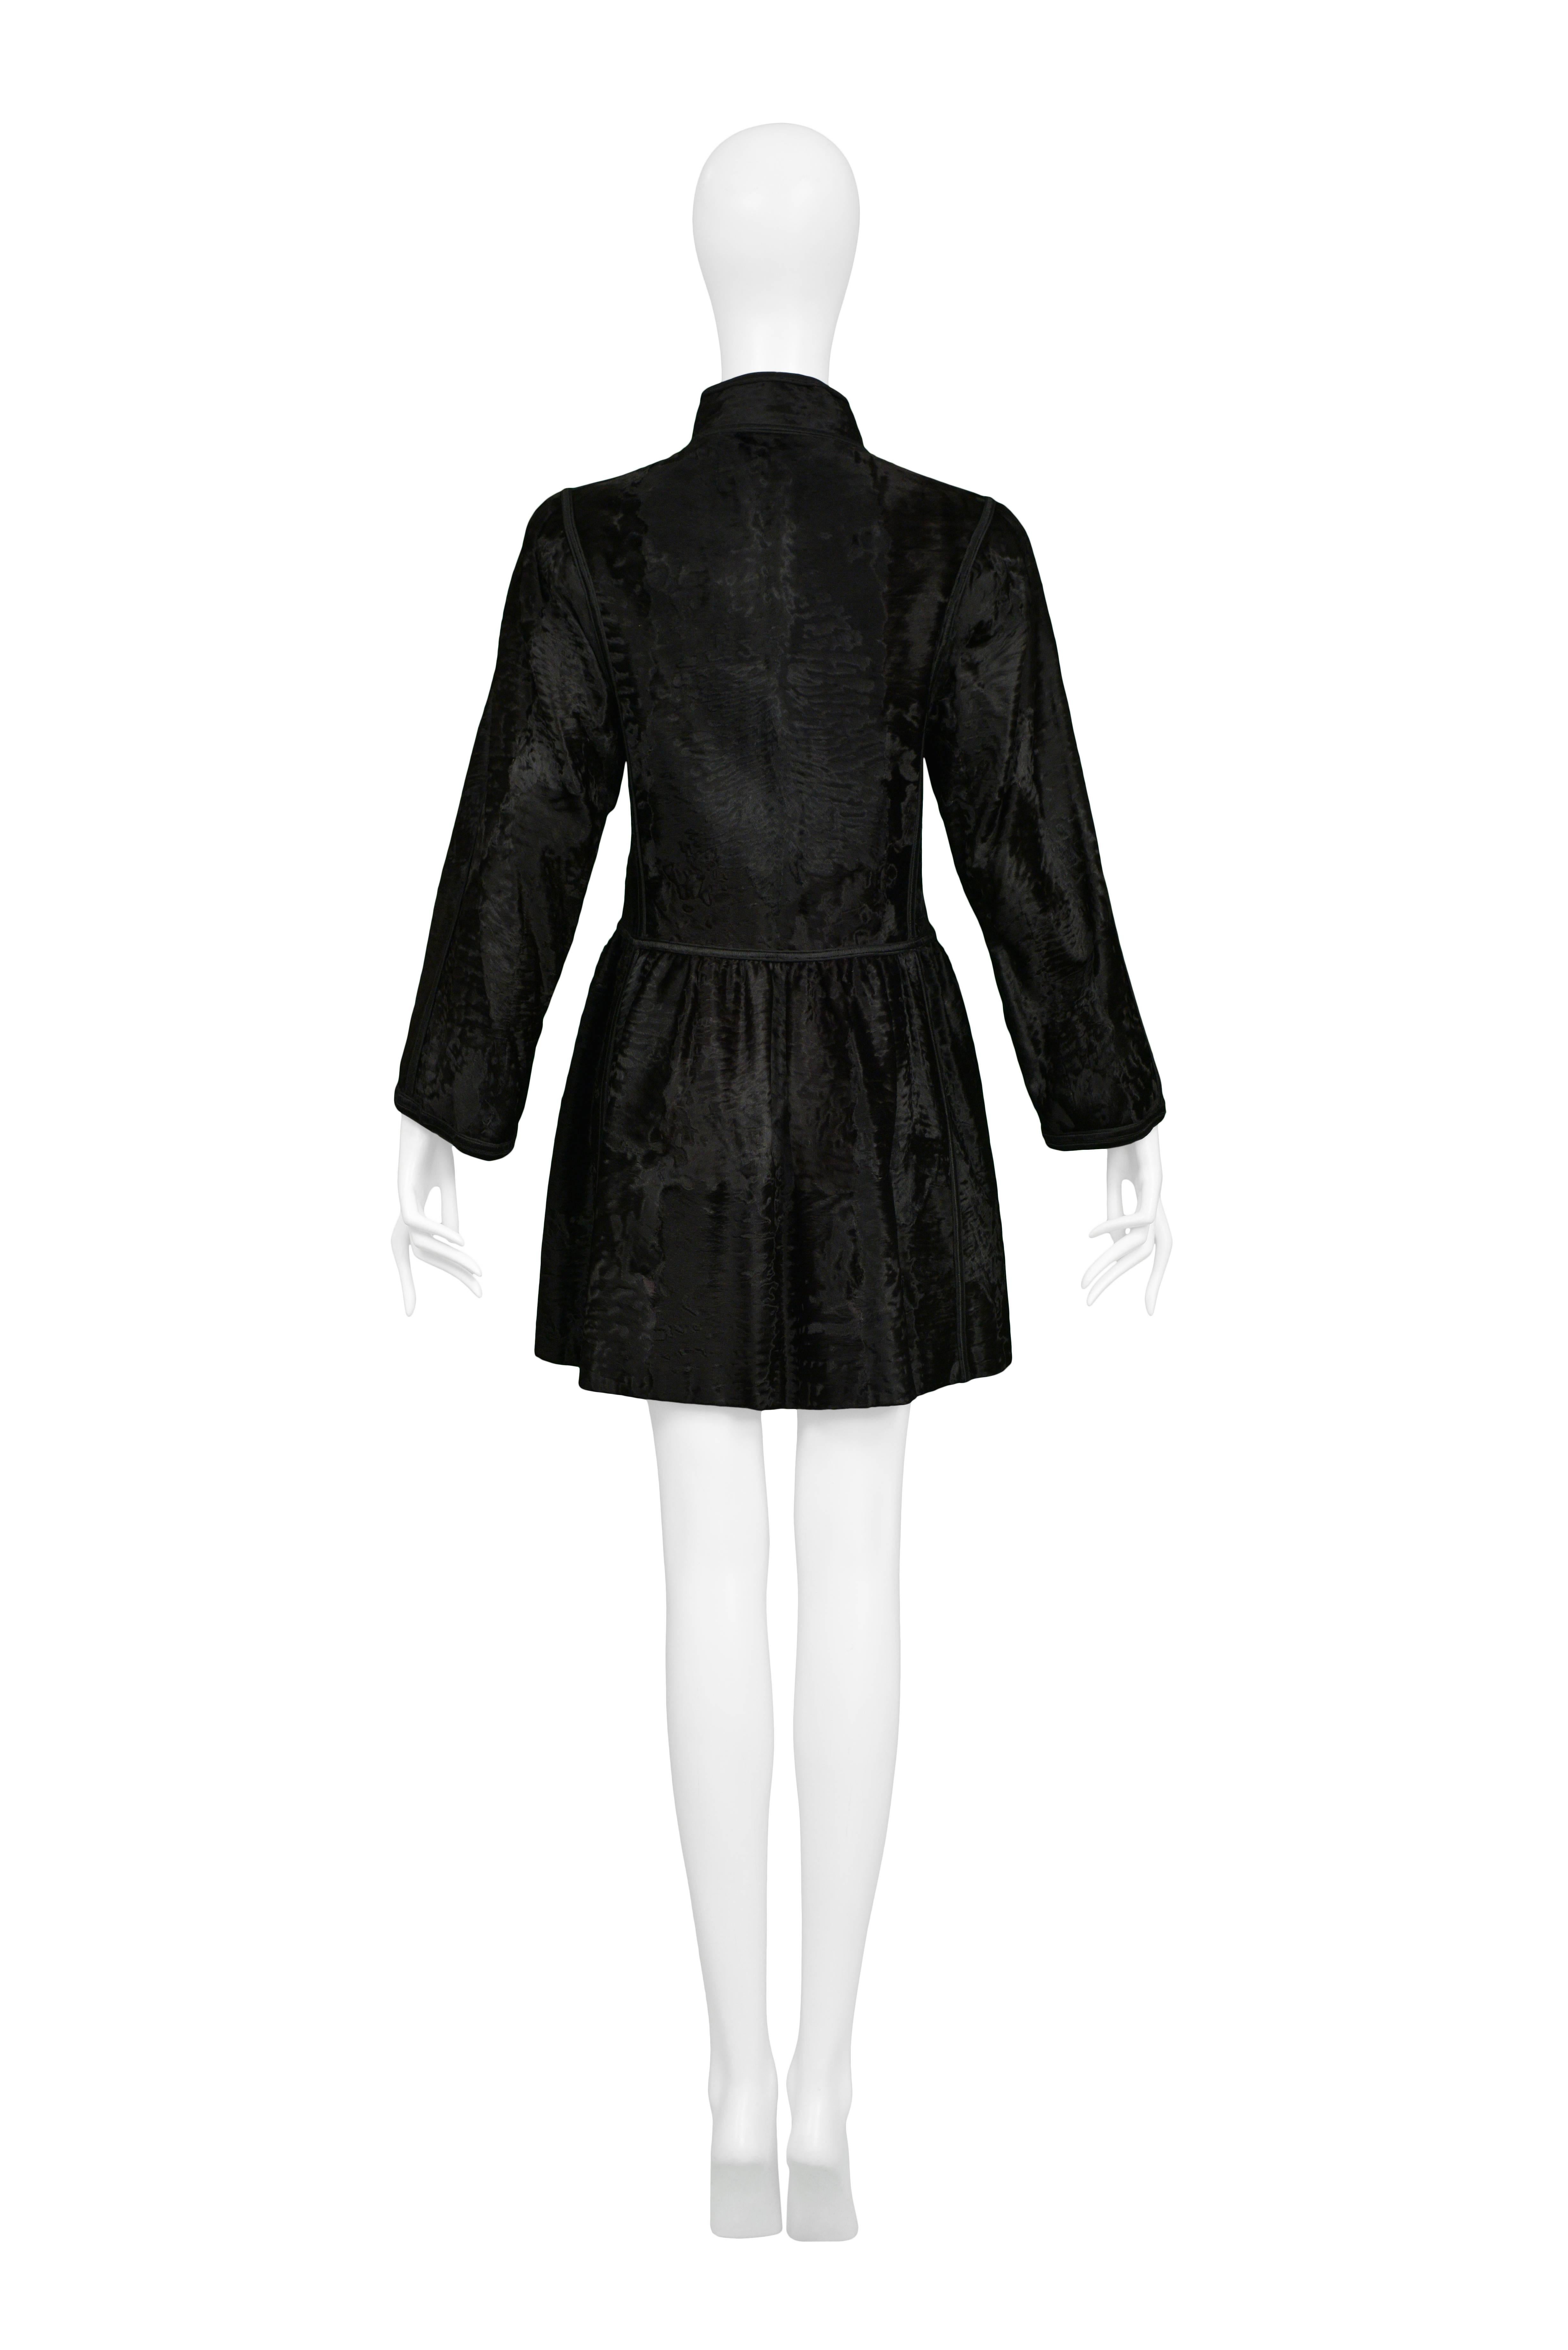 Yves Saint Laurent  Couture 
Russian Collection Black Broadtail Coat
Condition : Excellent Vintage Condition
Size : Small
A rare and important vintage Yves Saint Laurent couture 